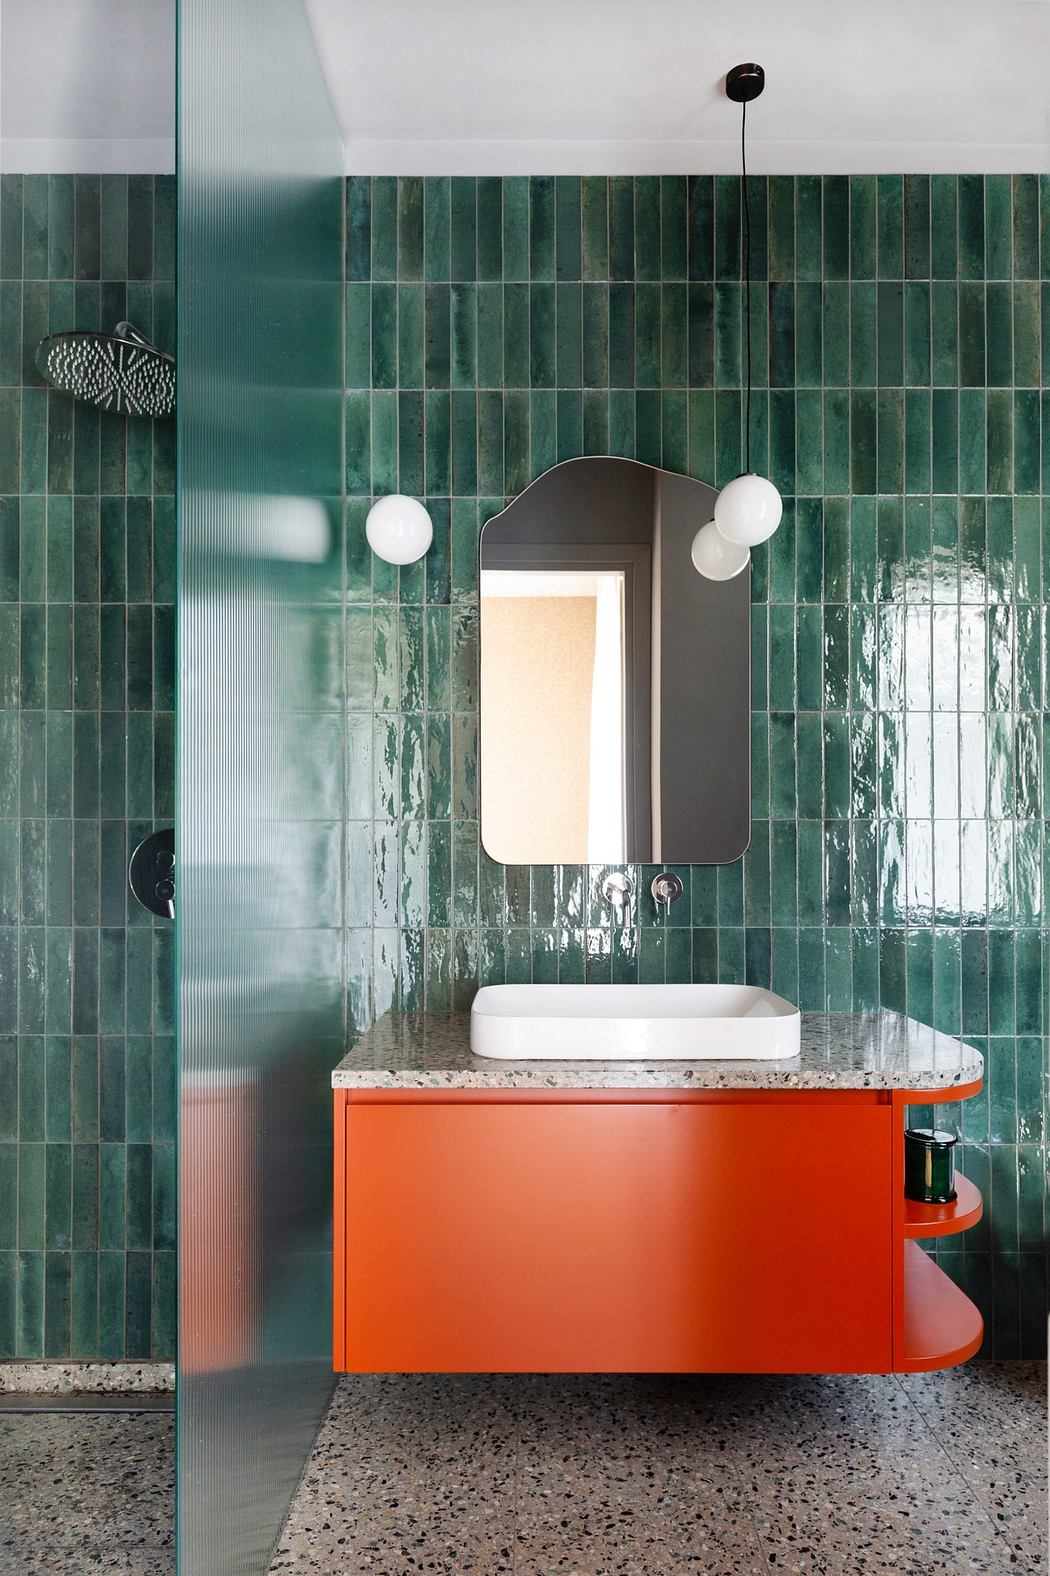 Modern bathroom with green tiles, orange vanity, and arch mirror.